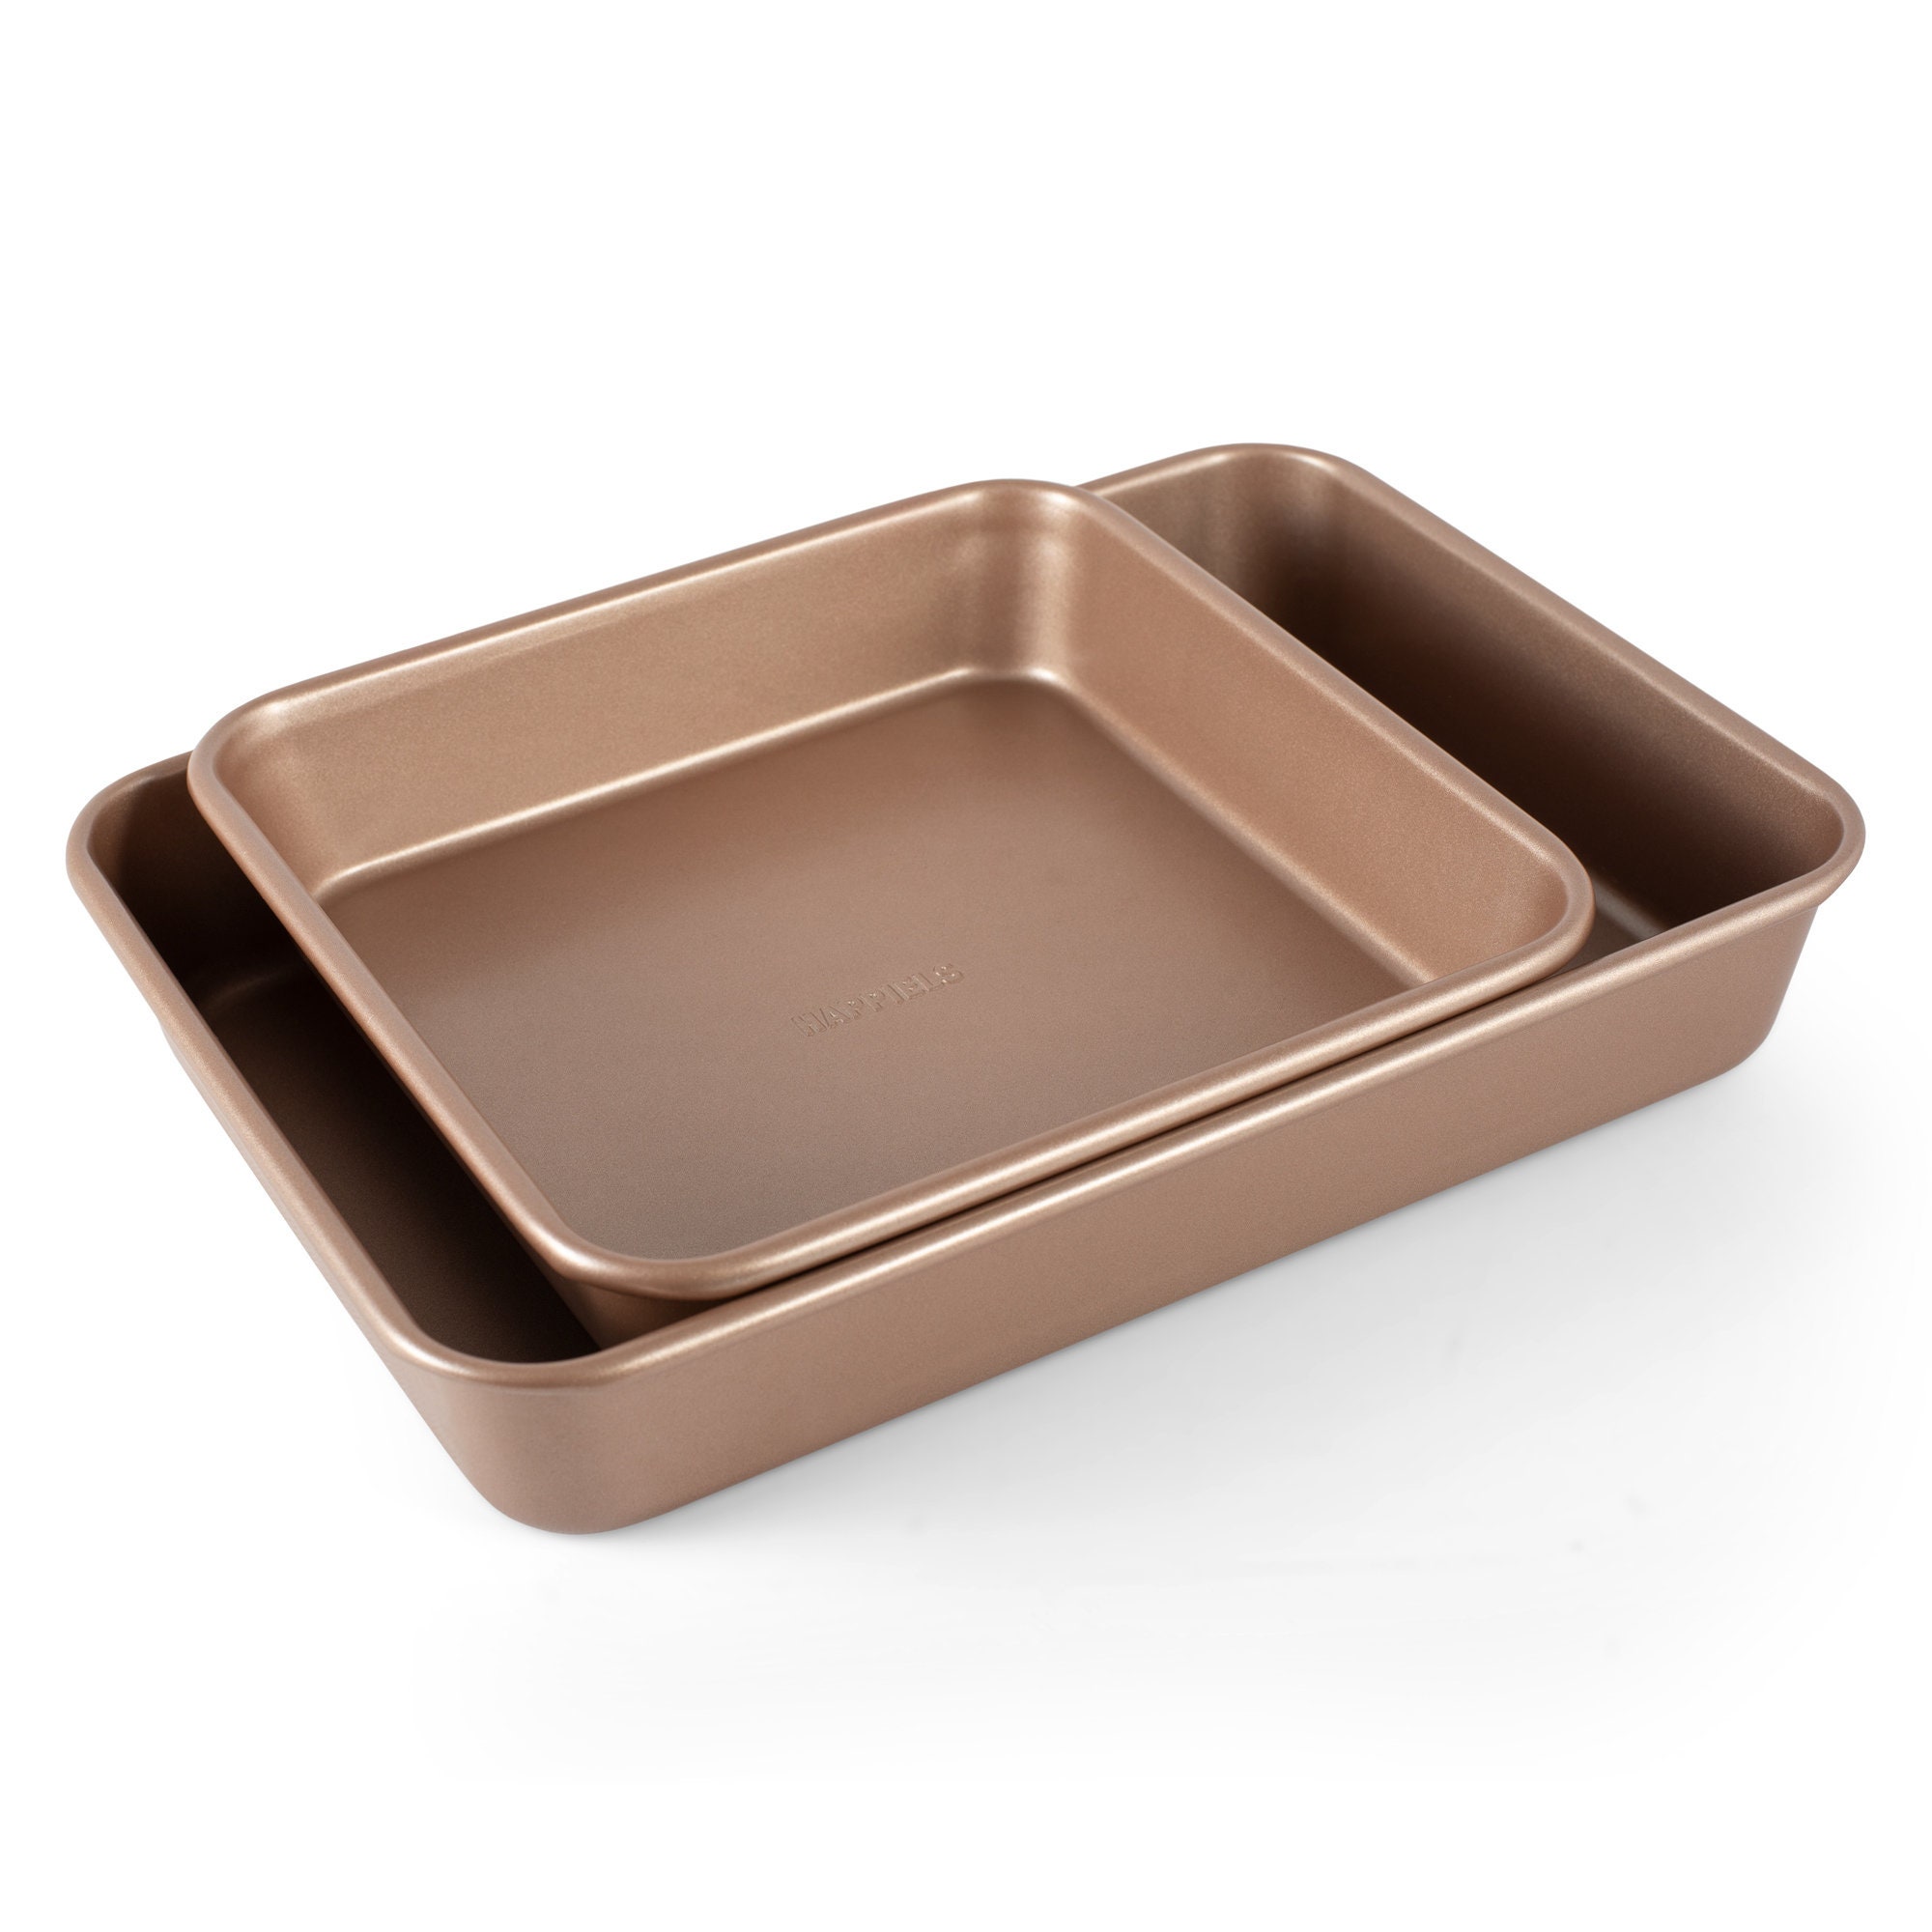 7 Non-Toxic Bakeware Brands to Heat Up Pastries, Not the Planet